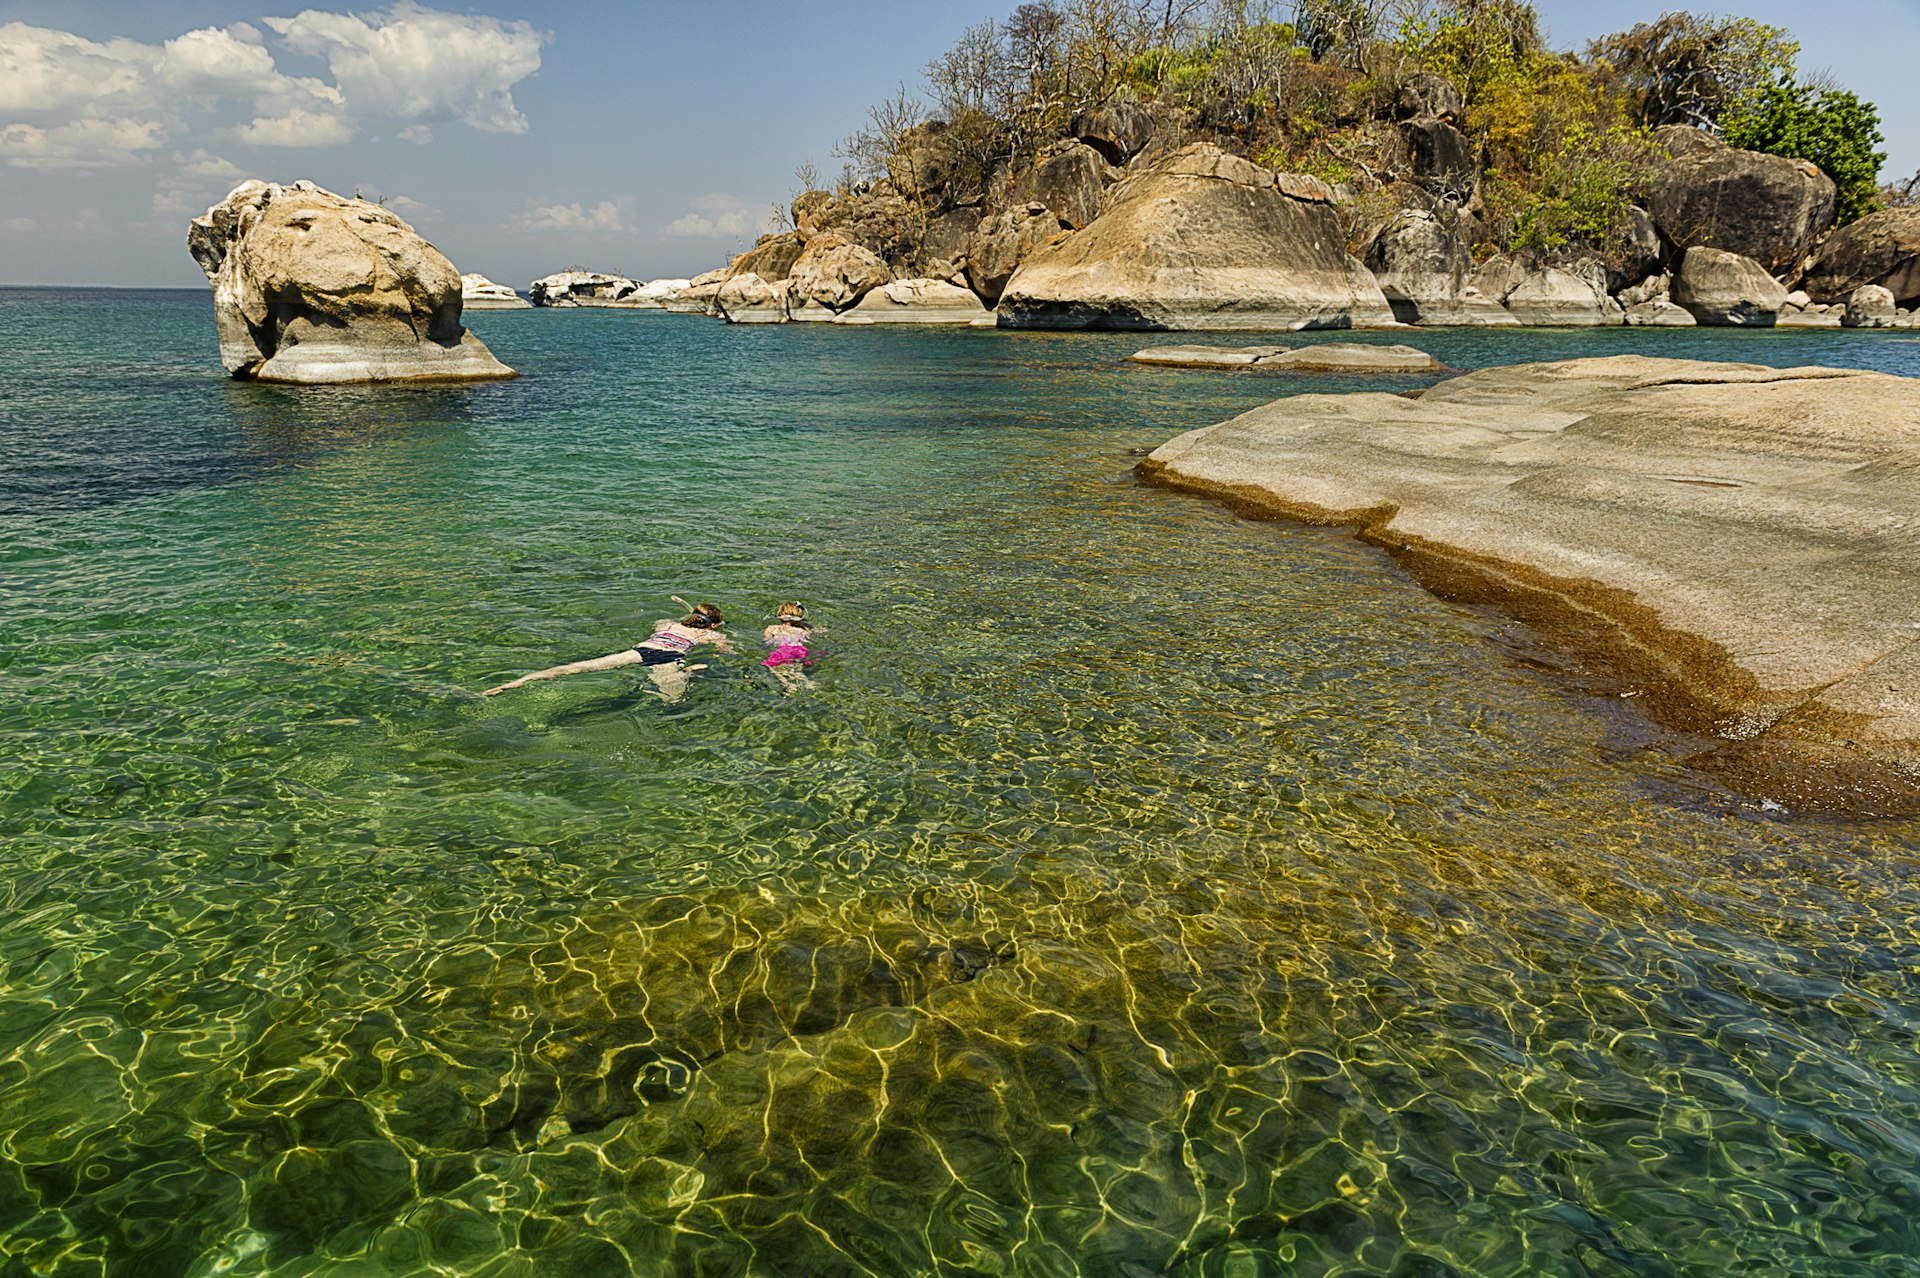 A mother and her daughter snorkeling in crystal clear waters near a rocky islet